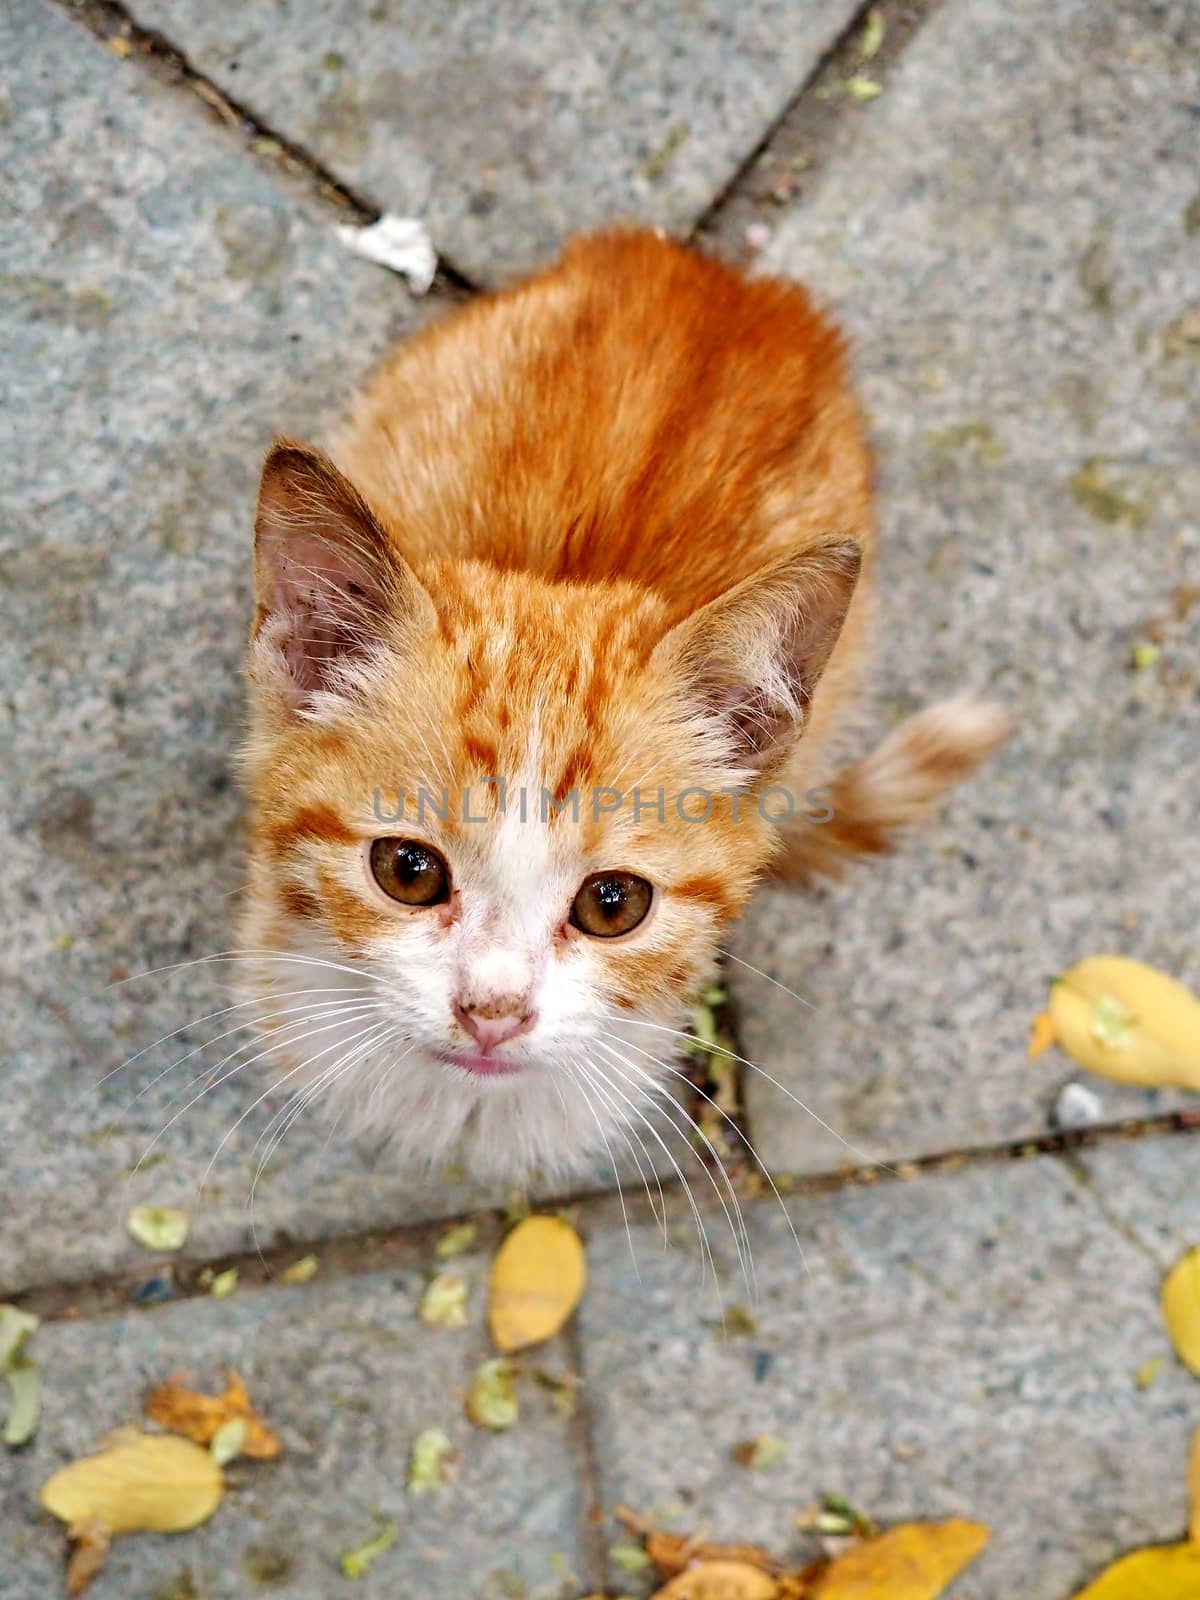 Homeless ginger cat on the street, looking at a photographer. Picture taken in Tbilisi, in Georgia, Asia.